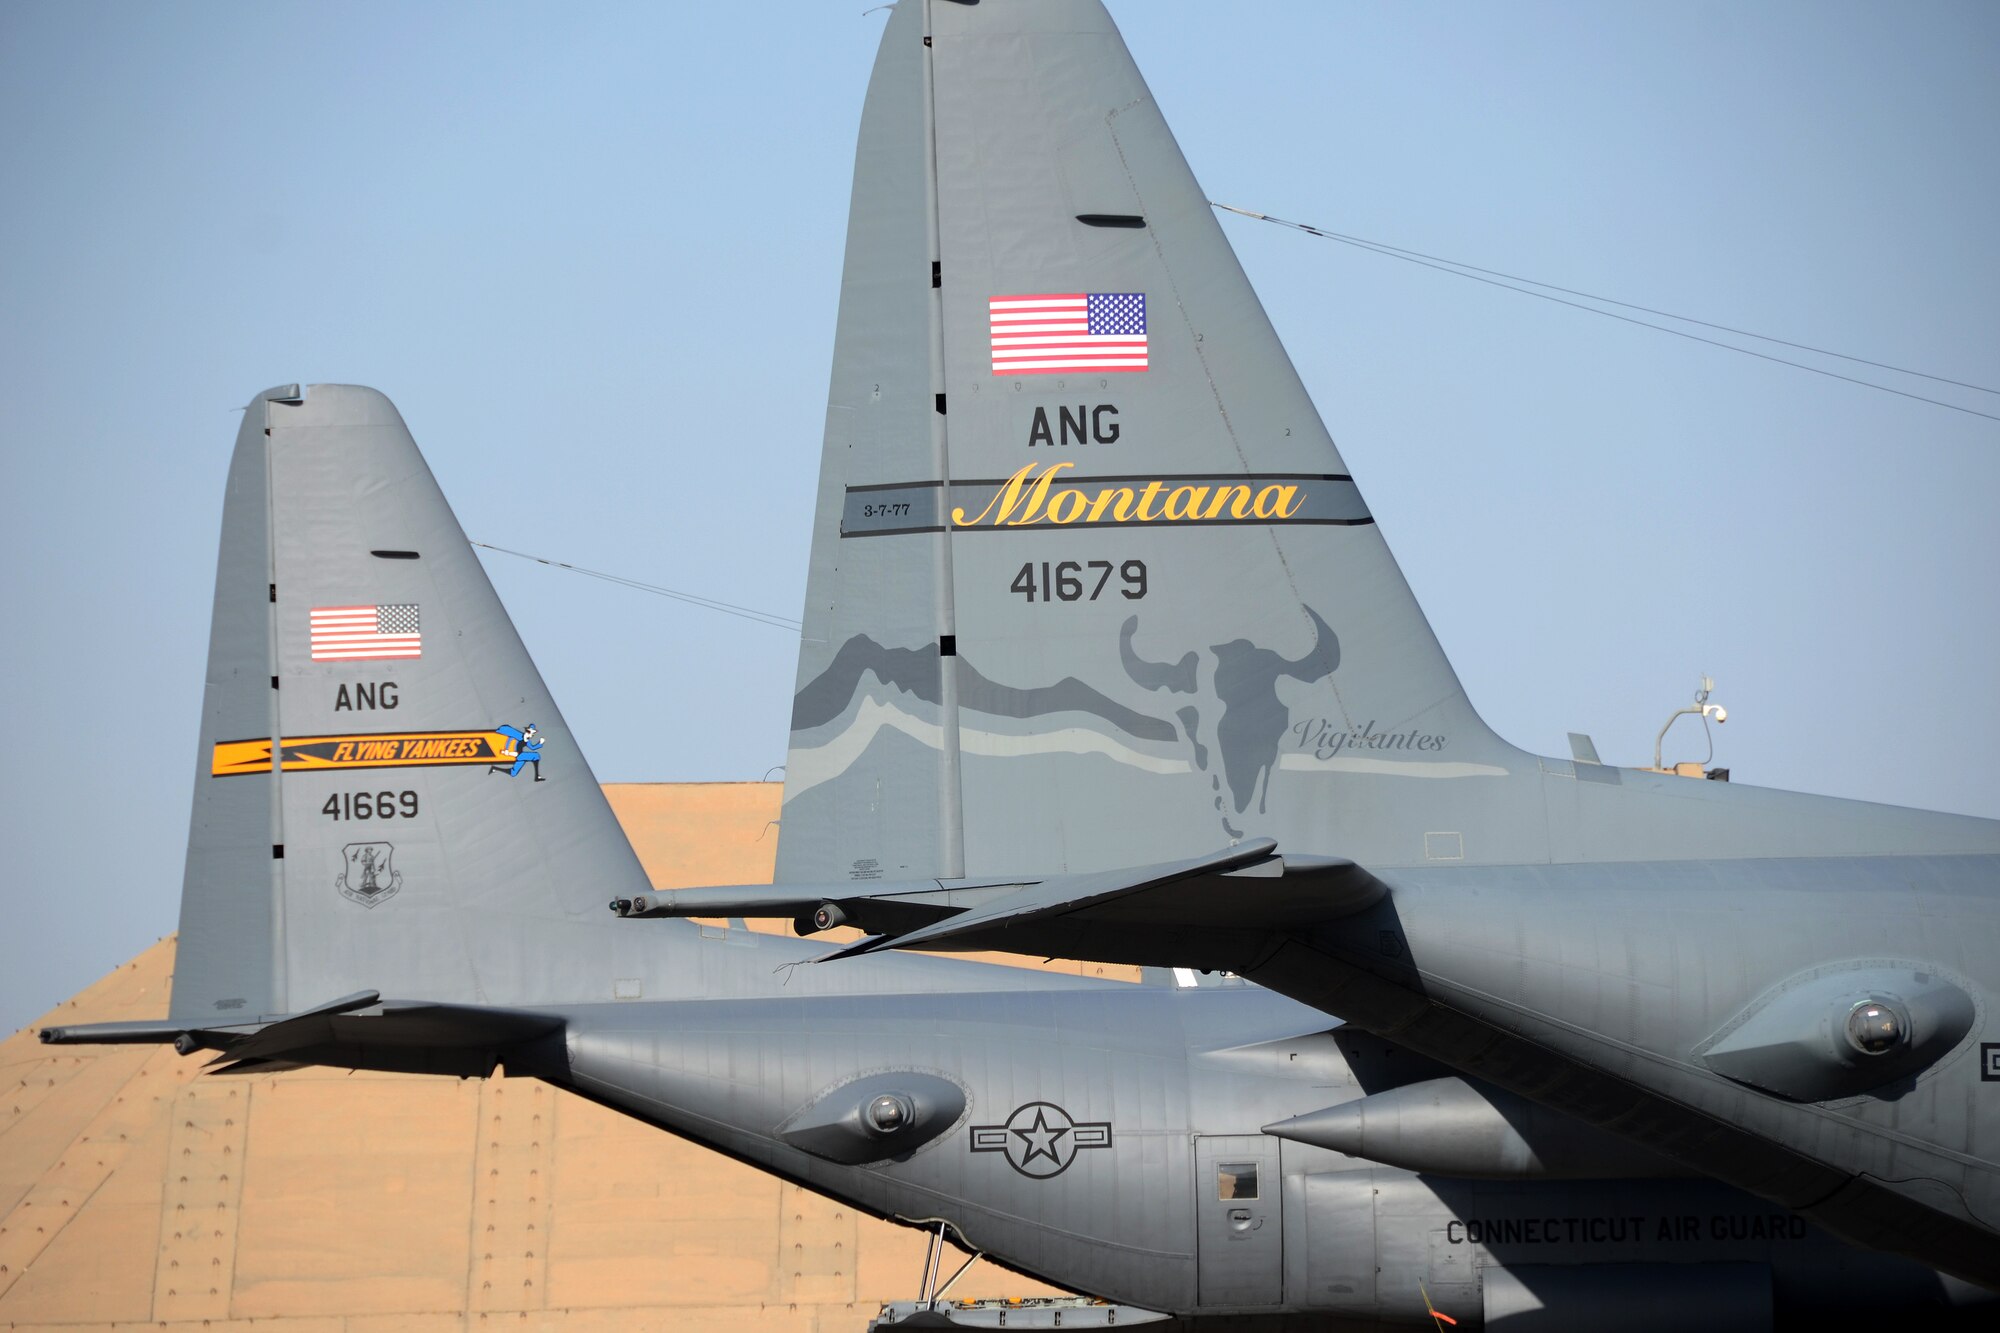 U.S. Air Force C-130s from the Montana and Connecticut Air National Guard currently assigned to the 386th Air Expeditionary Wing sit side by side on the tarmac at Ali Al Salem Air Base, Kuwait, July 3, 2019. The units are currently deployed here providing tactical airlift to the Central Command Area of Responsibility. (U.S. Air National Guard photo by Capt. Stephen Hudson/Released)